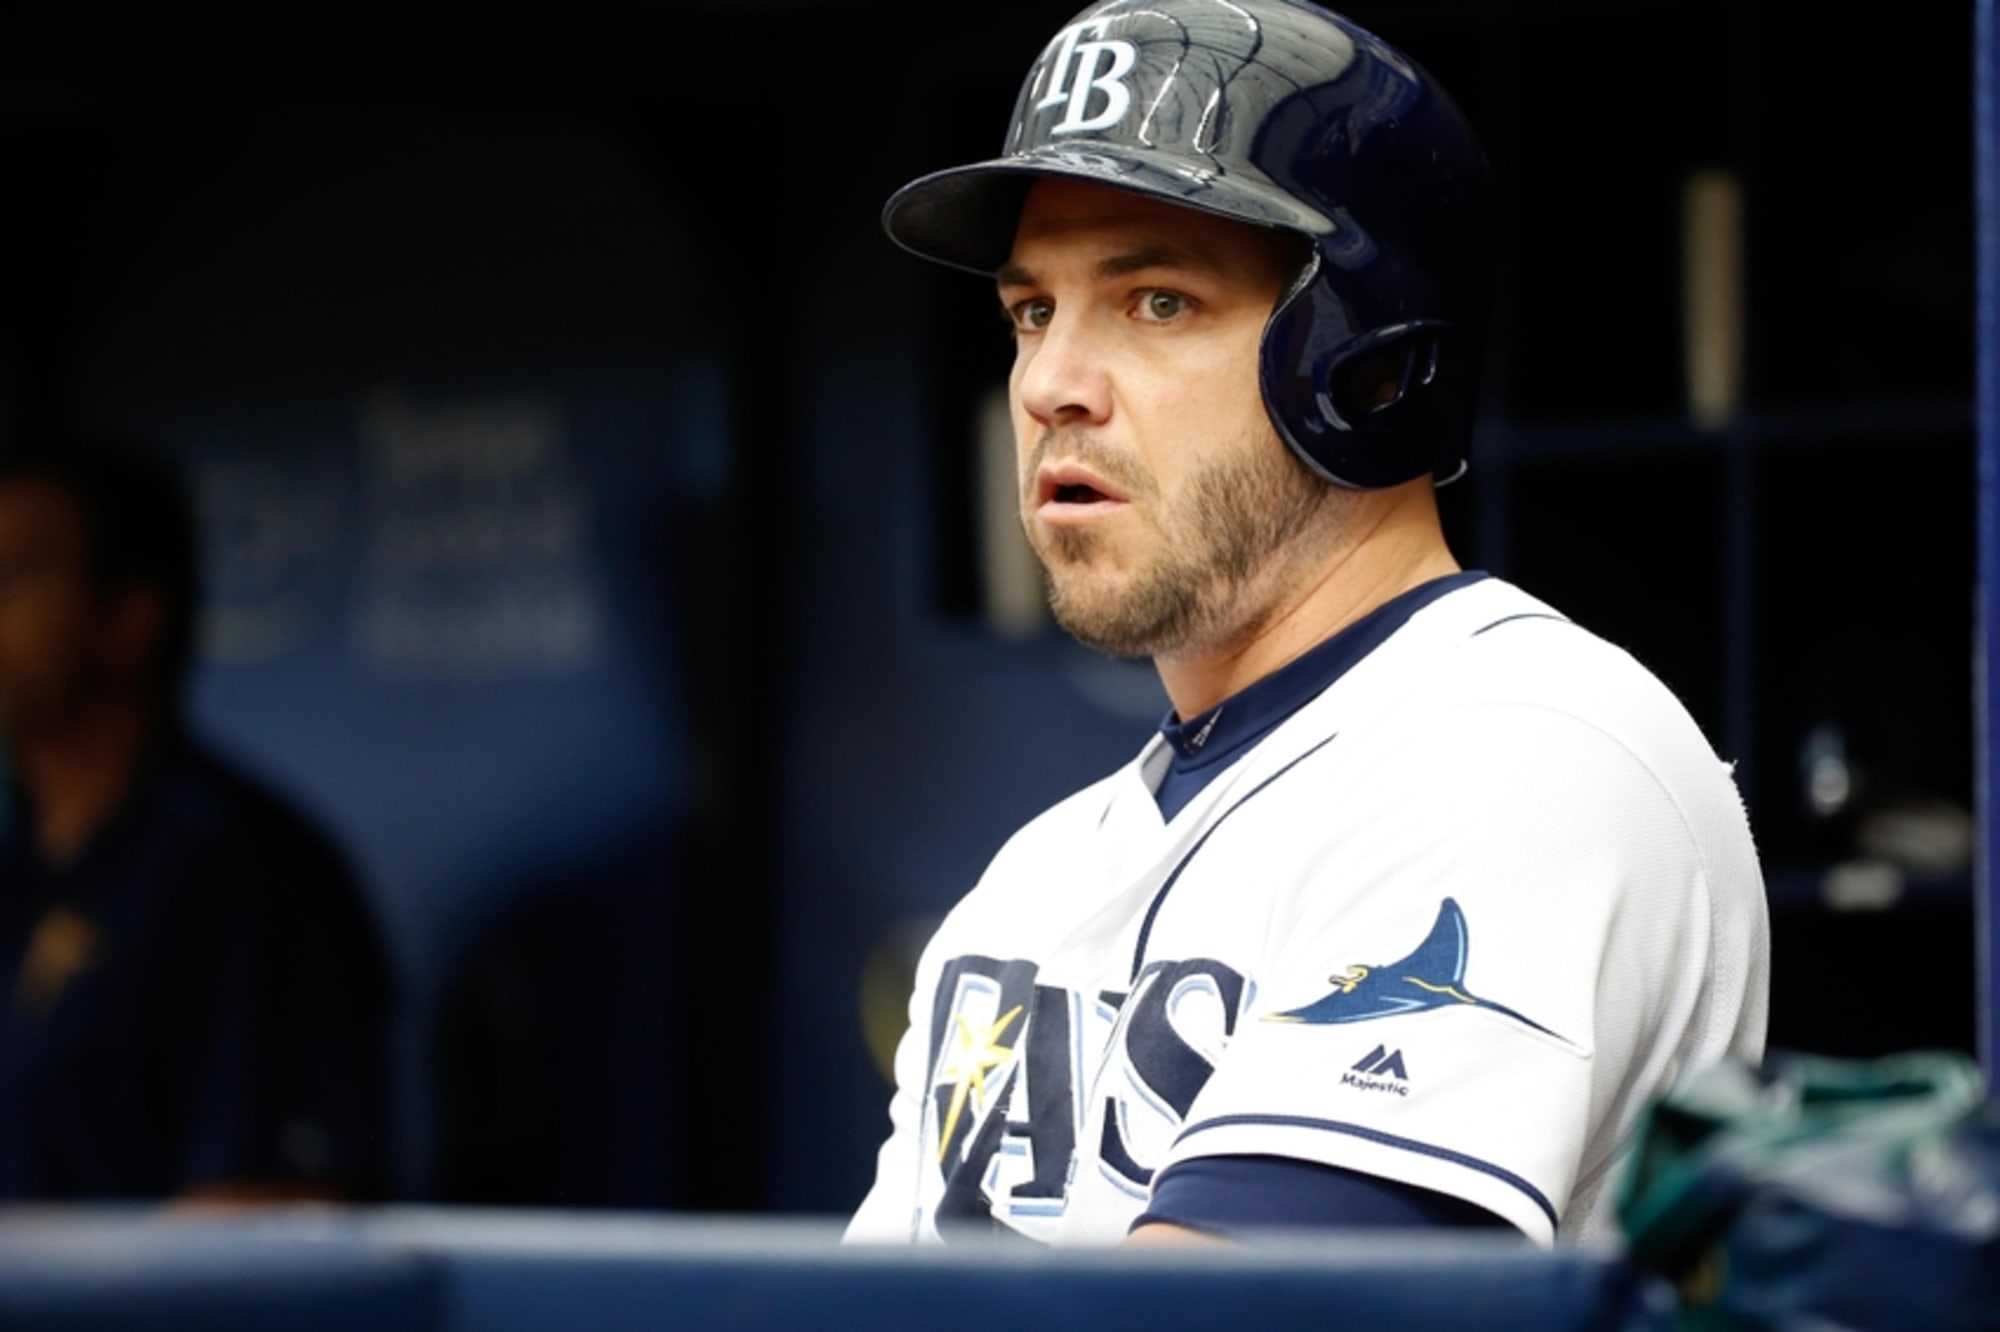 MLB Trade Rumors: Orioles to acquire Steve Pearce from Rays